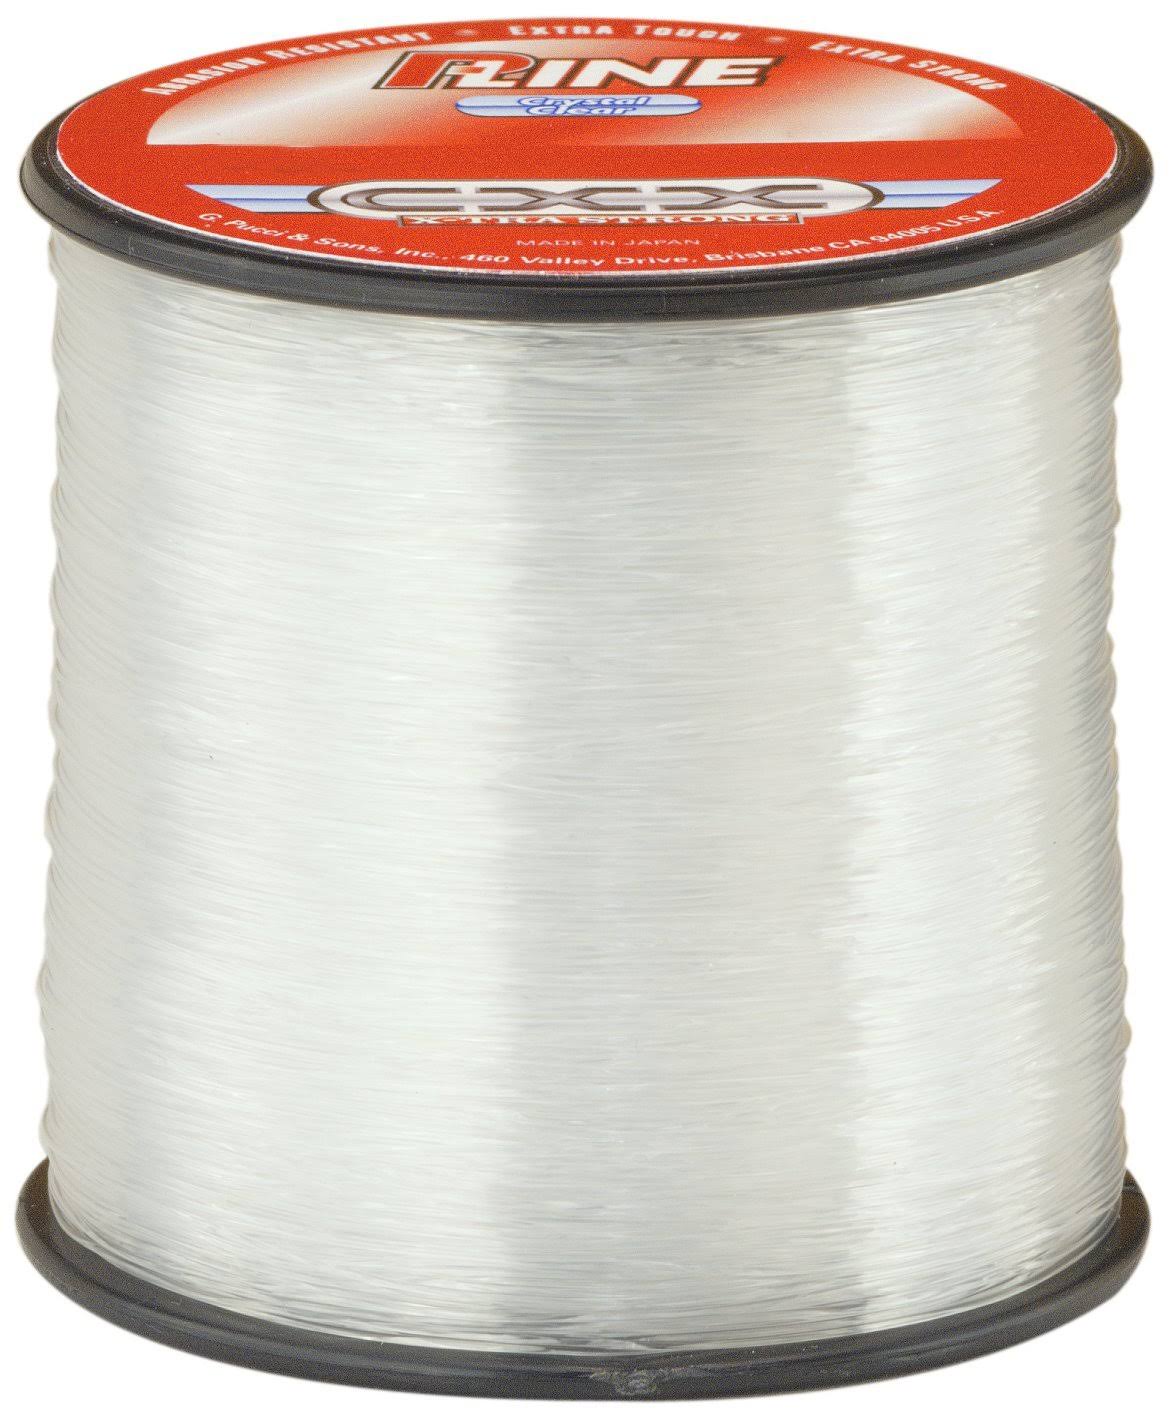 P-Line CXX-Xtra Strong 1/4 Size Fishing Spool (600-Yard, 8-Pound, Crystal Clear)